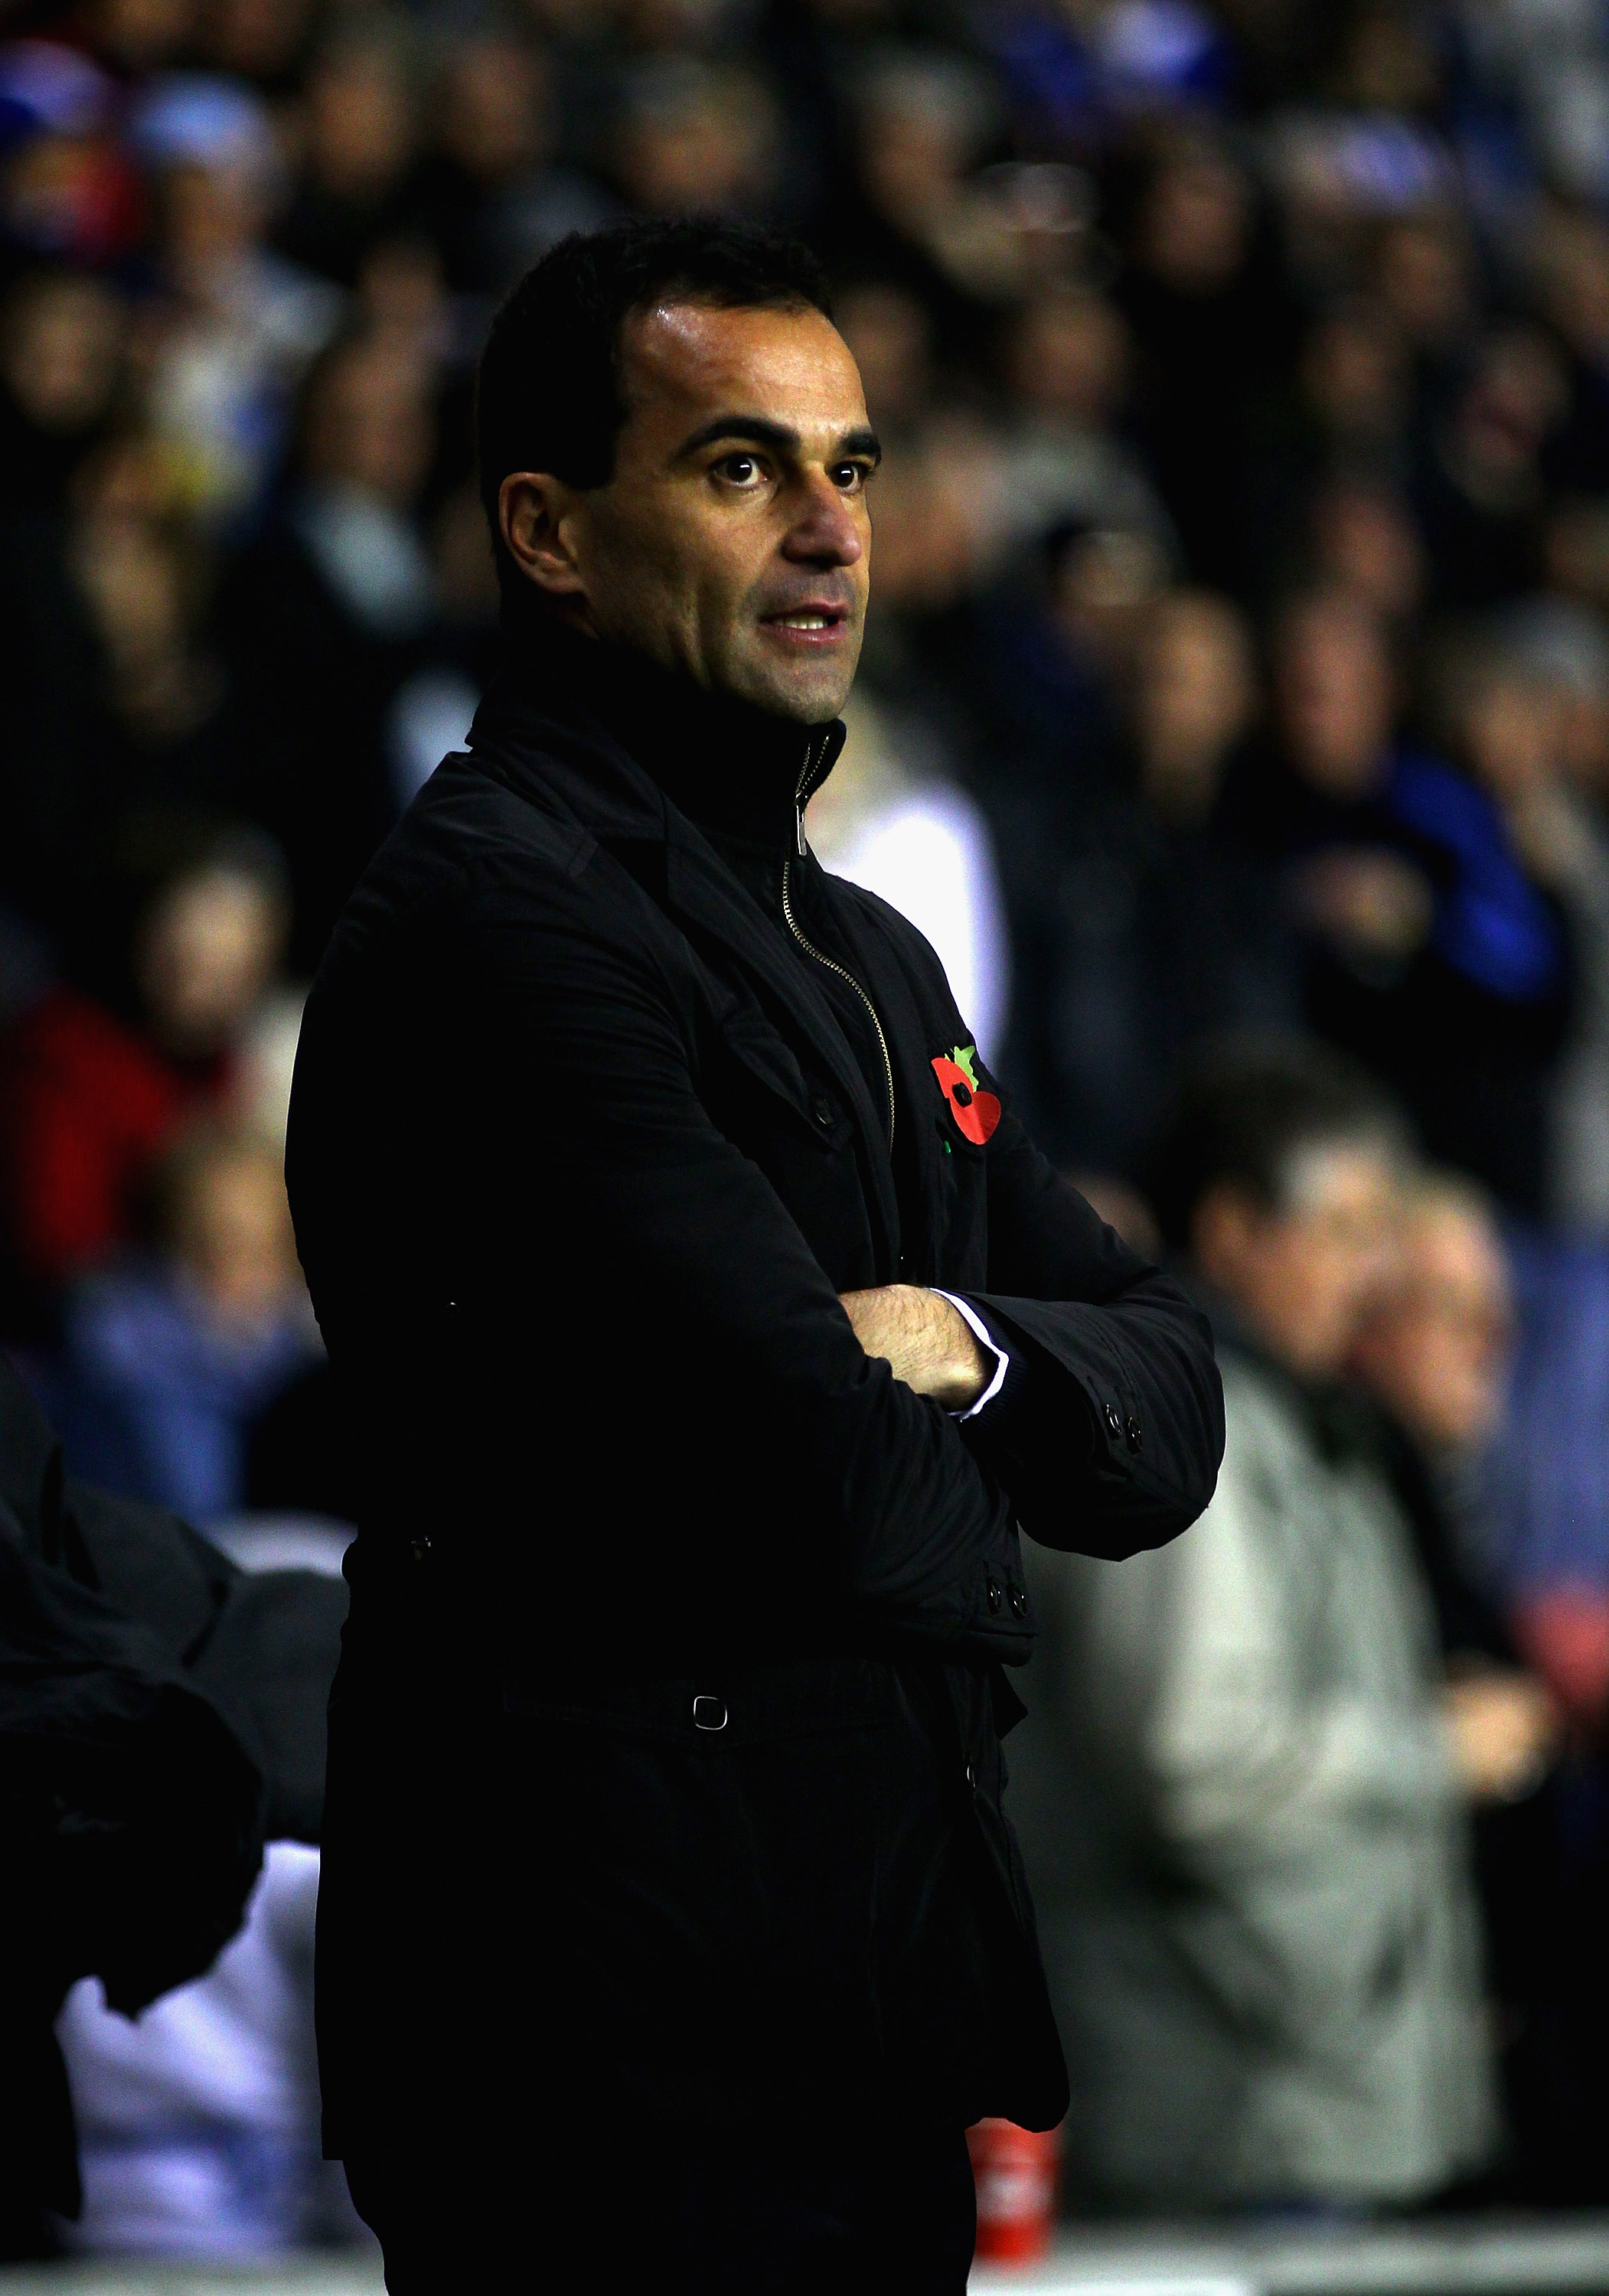 WIGAN, ENGLAND - NOVEMBER 10:  Wigan Athletic manager Roberto Martinez during the Barclays Premier League match between Wigan Athletic and Liverpool at DW Stadium on November 10, 2010 in Wigan, England.  (Photo by Clive Brunskill/Getty Images)